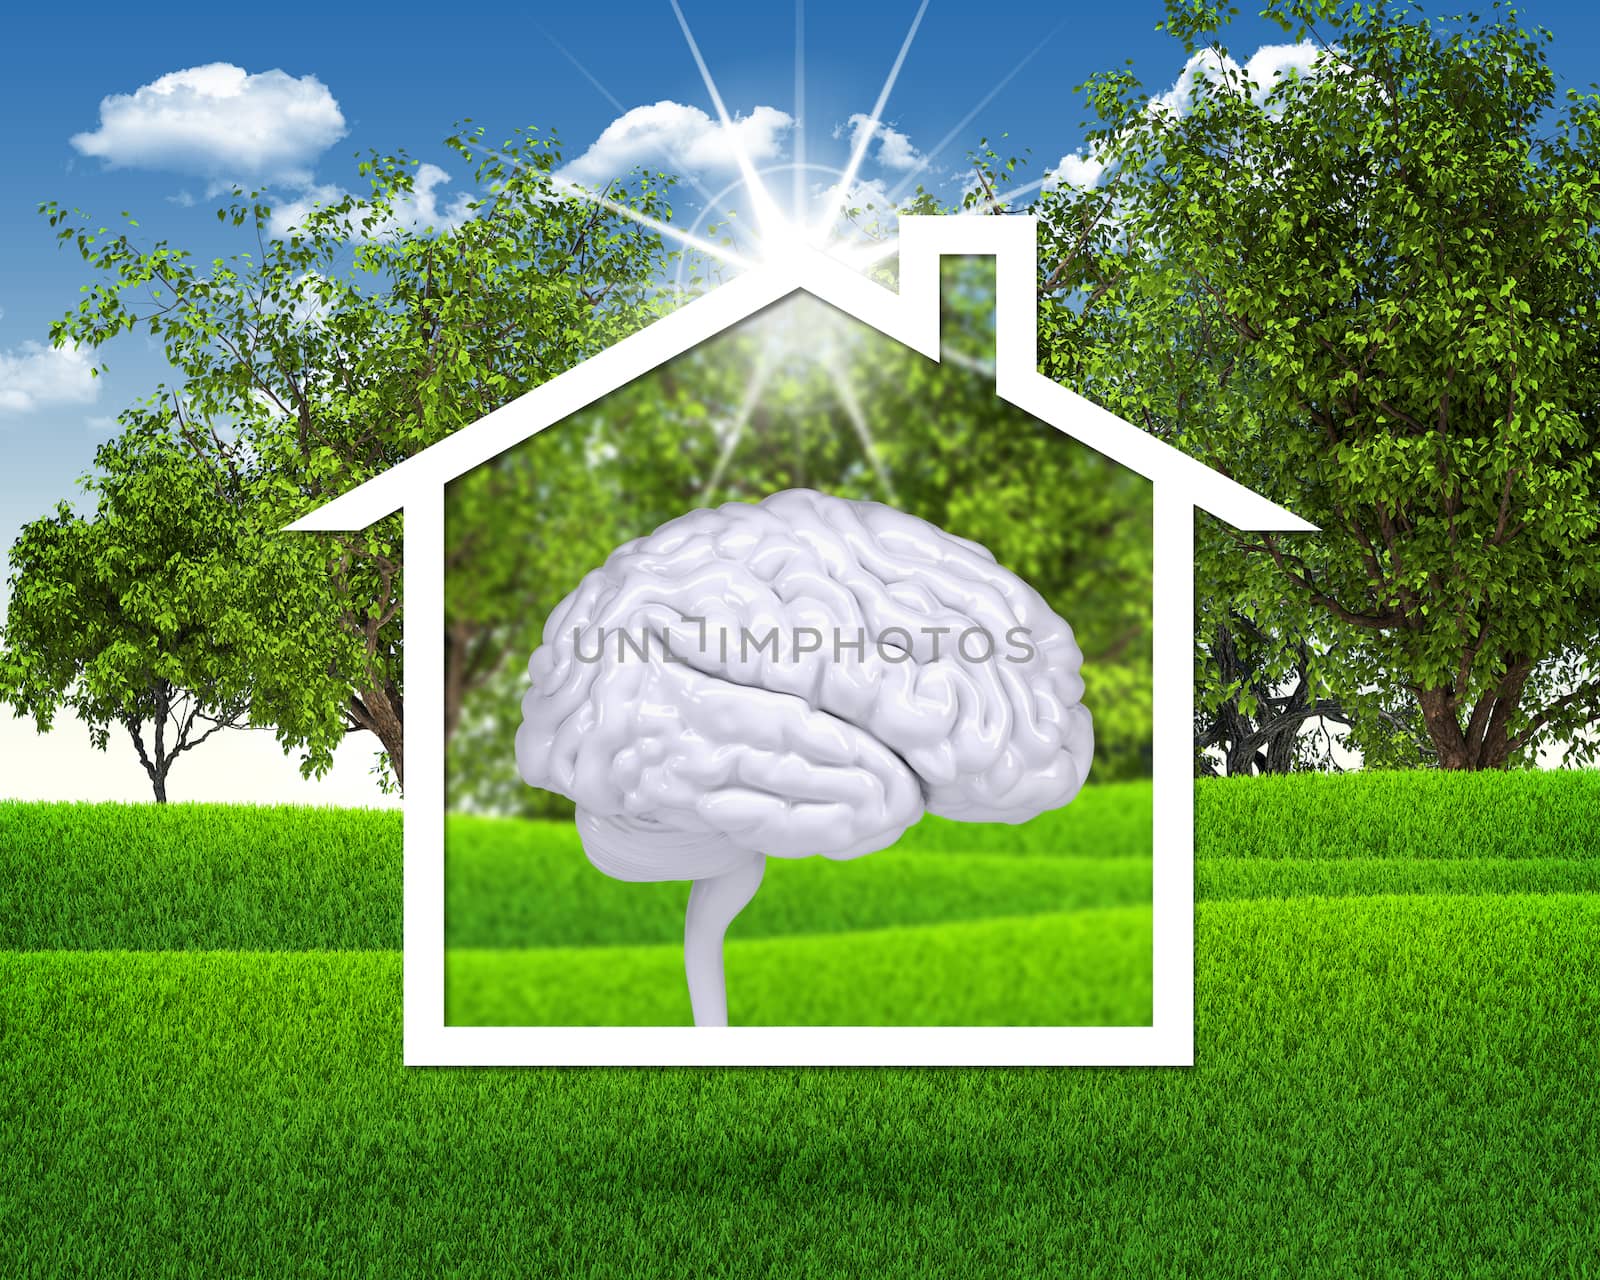 House icon with white brain. Green grass and blue sky as backdrop